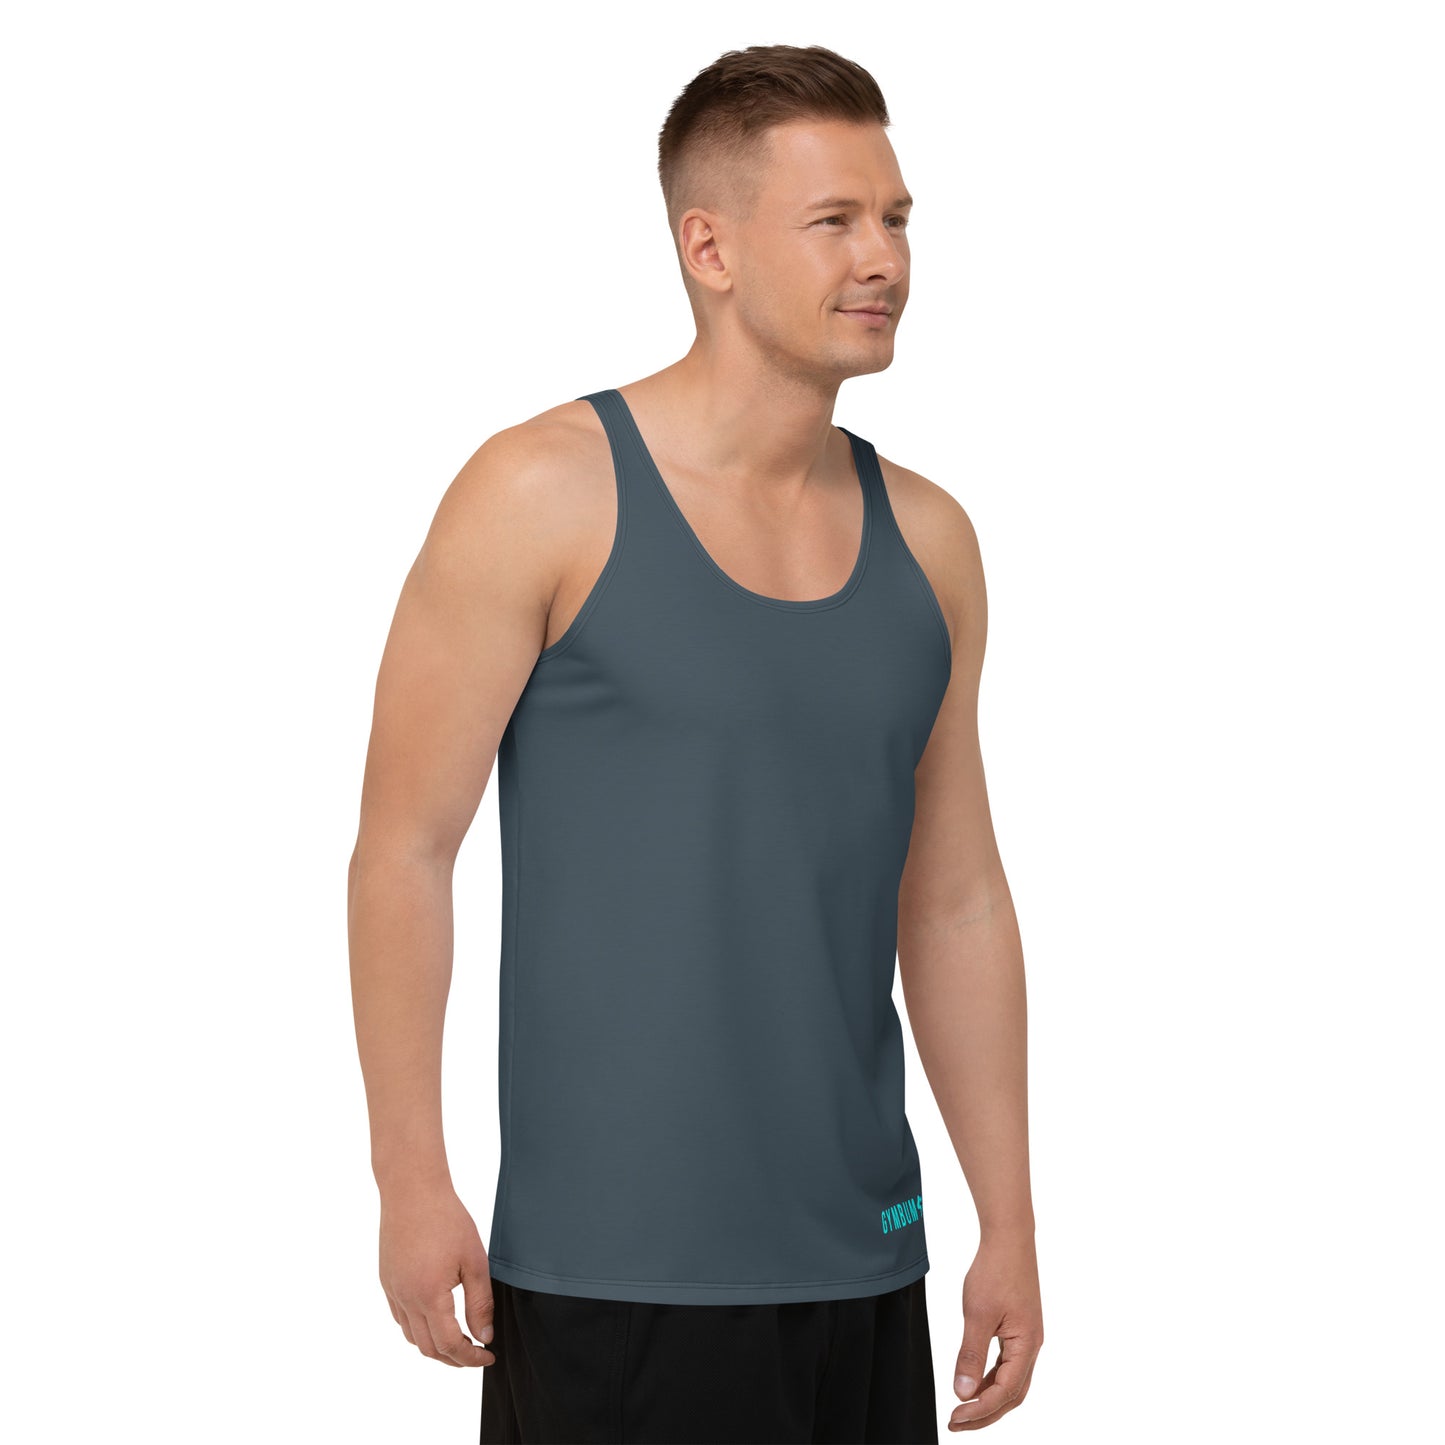 The Gymbum UK Charcoal QuickDry Ultimate Performance Tank Top